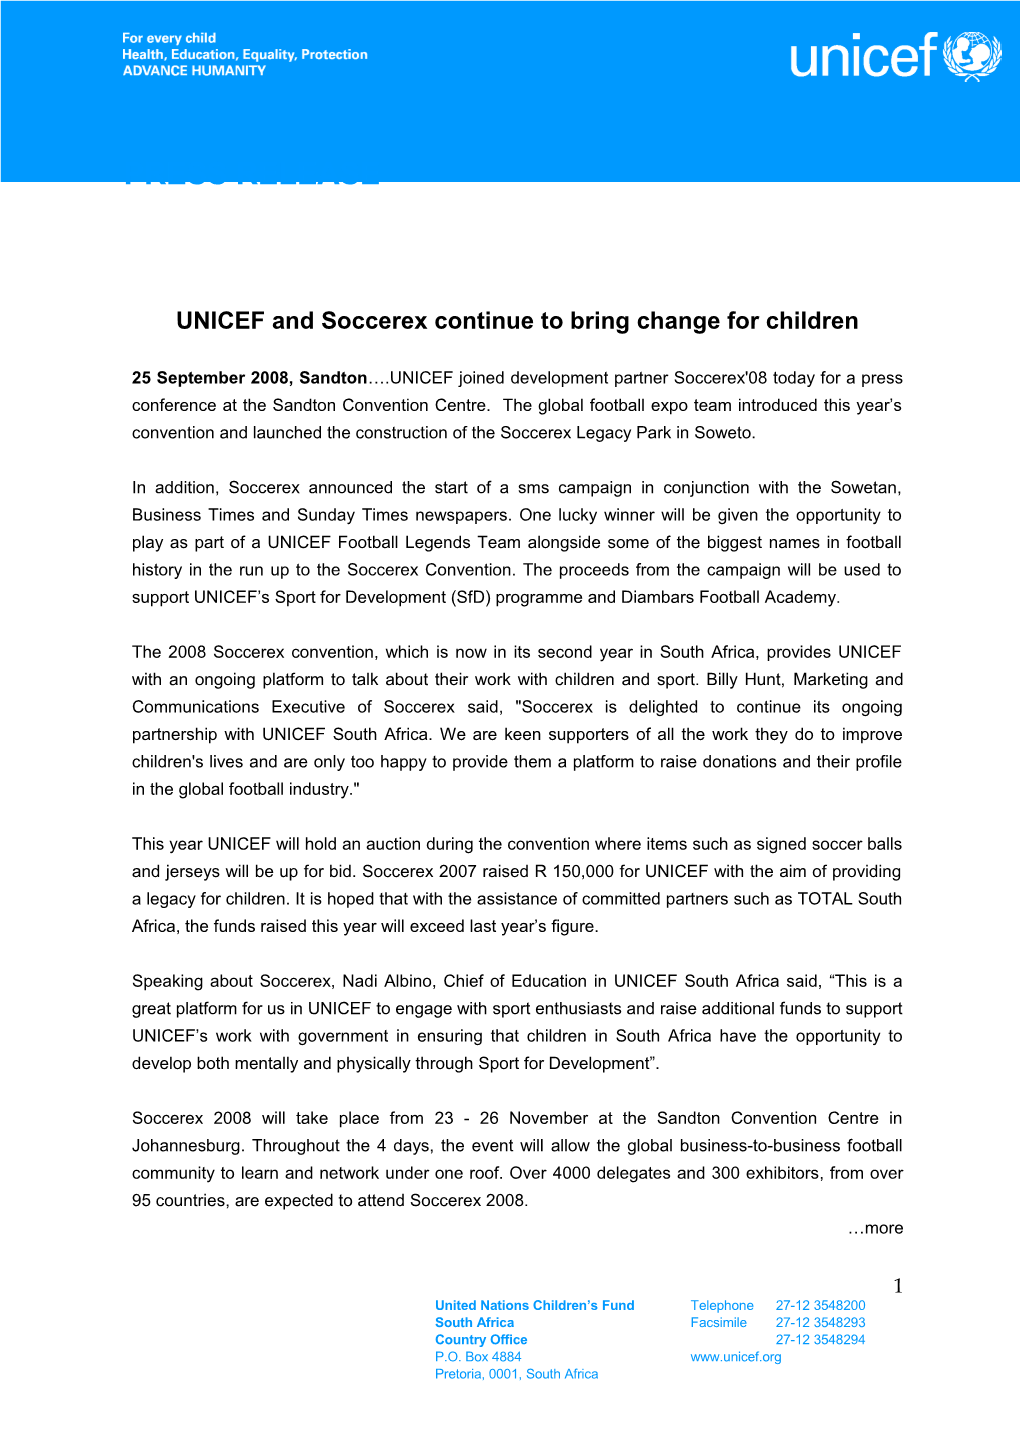 UNICEF and Soccerex Continue to Bring Change for Children